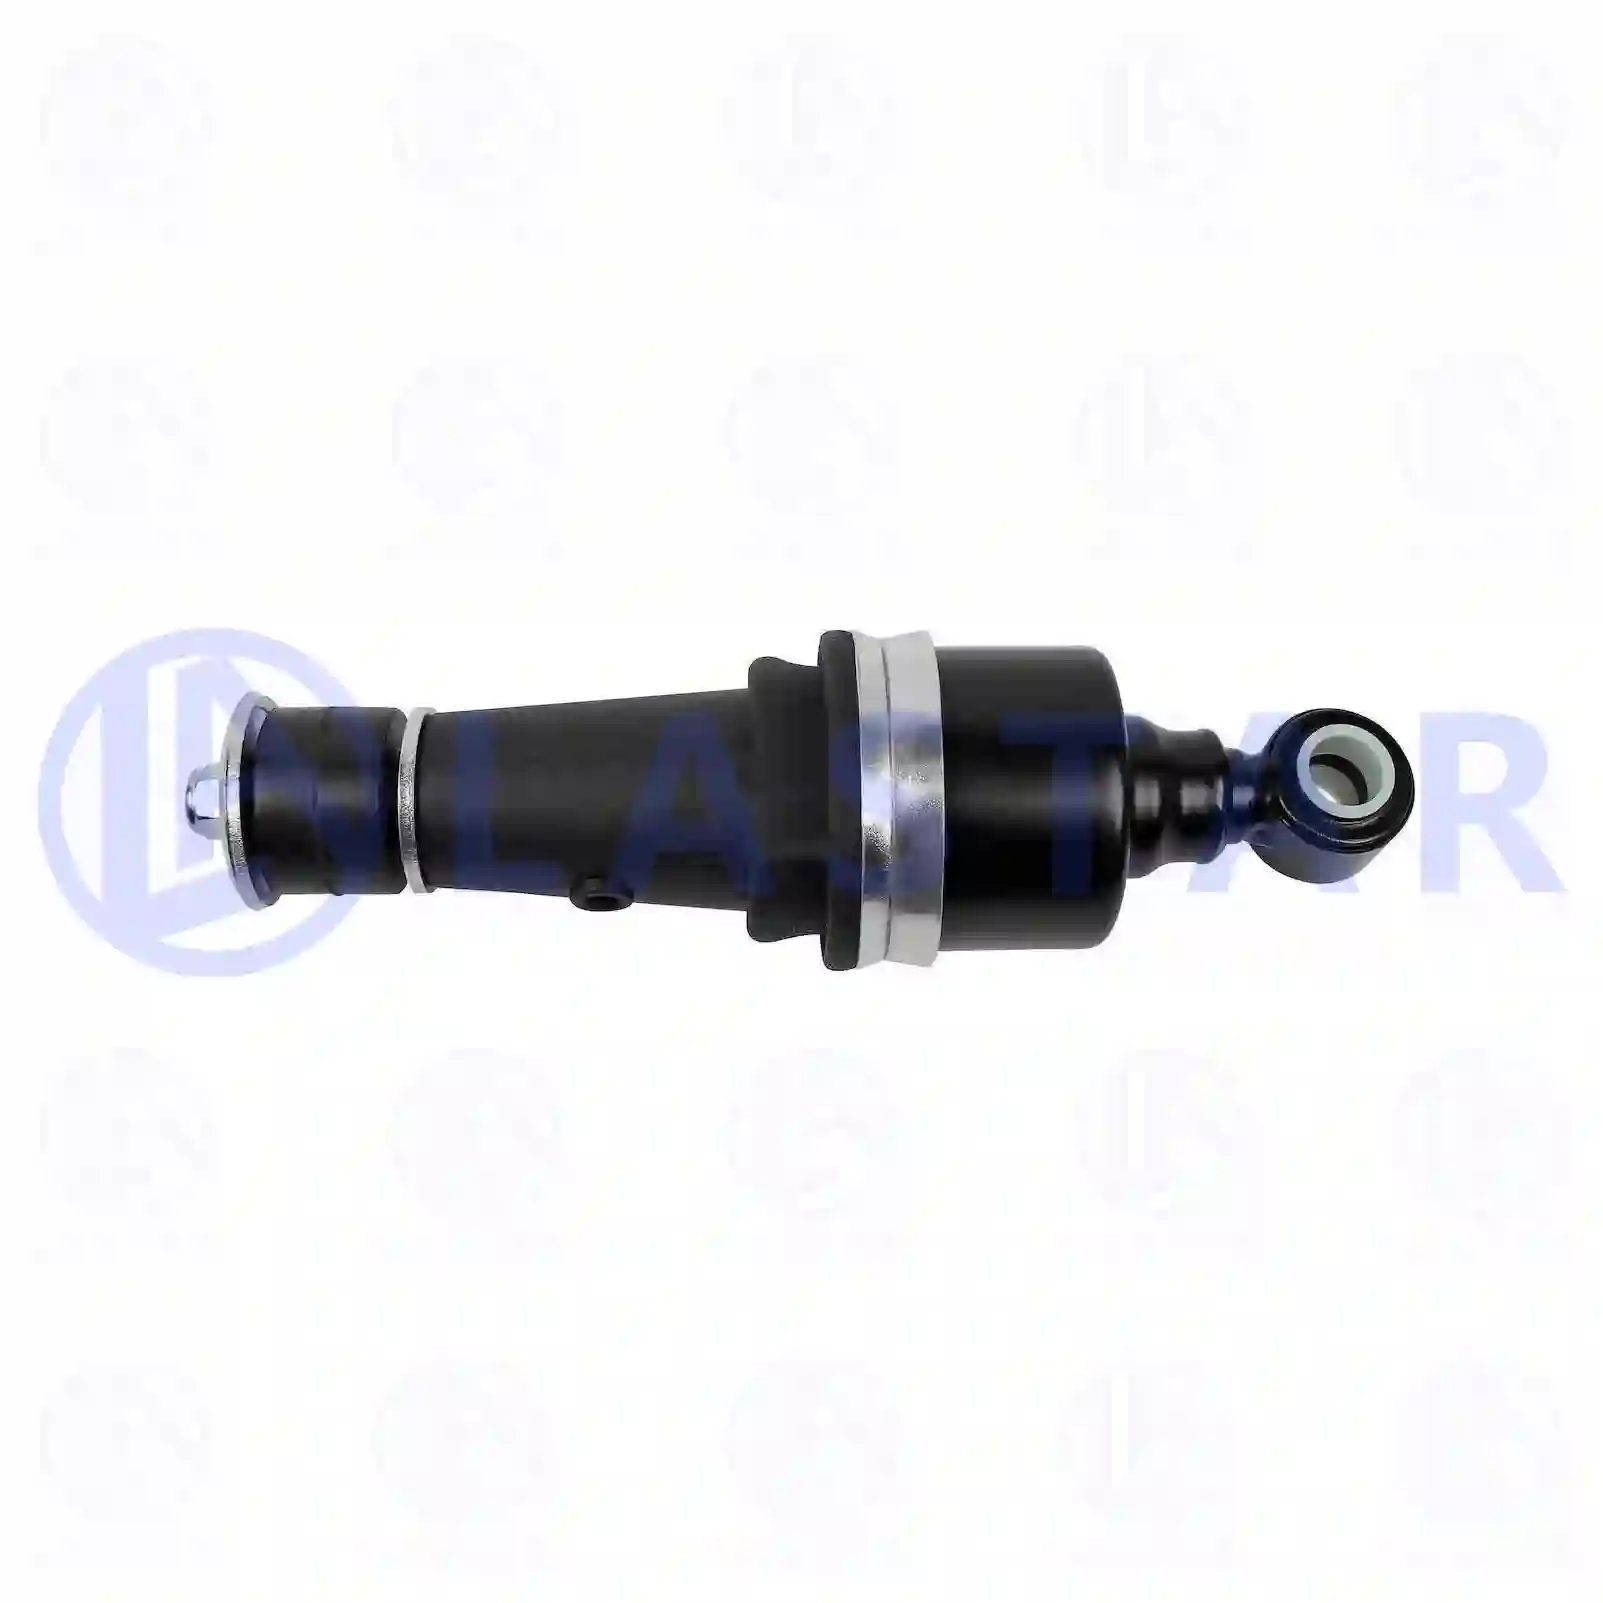 Shock Absorber Cabin shock absorber, with air bellow, la no: 77734548 ,  oem no:0375224, 1245580, 1265281, 1285393, 1321590, 1353450, 1353453, 1371065, 1444147, 1622211, 375224, ZG41219-0008 Lastar Spare Part | Truck Spare Parts, Auotomotive Spare Parts